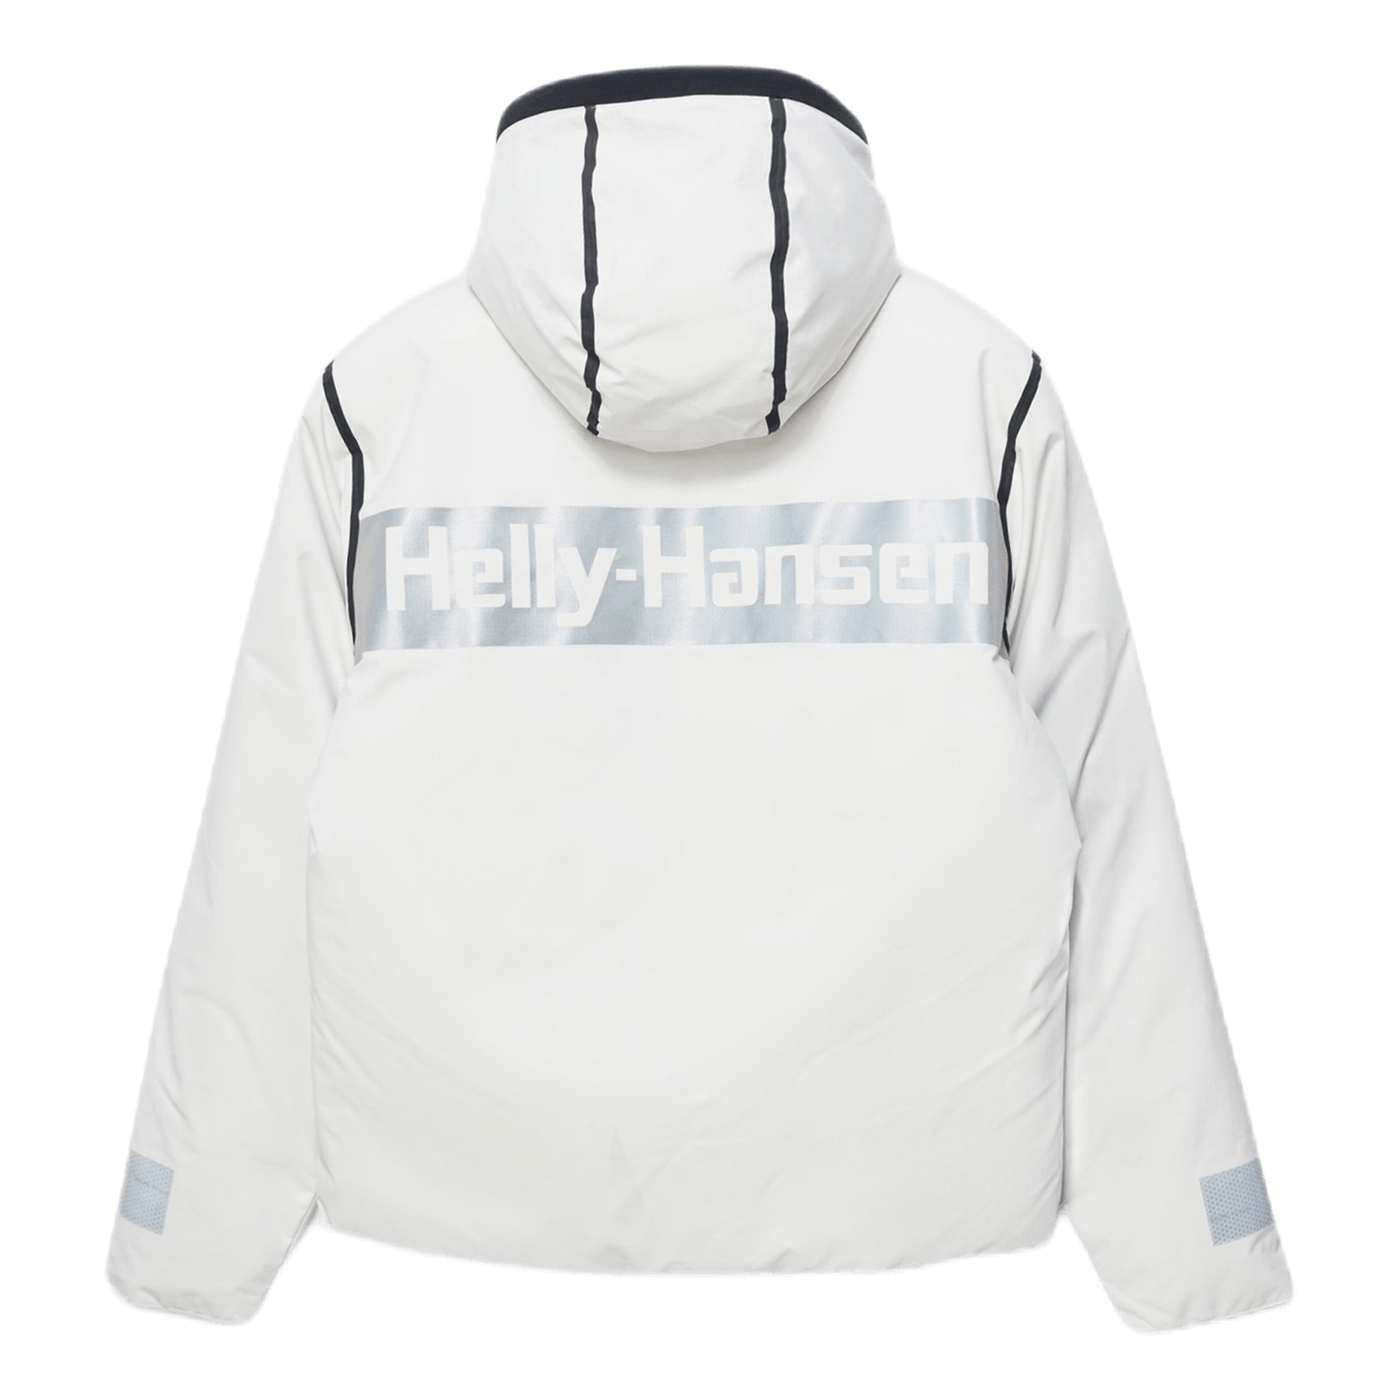 Heritage Hh Arc Reversible Puf White